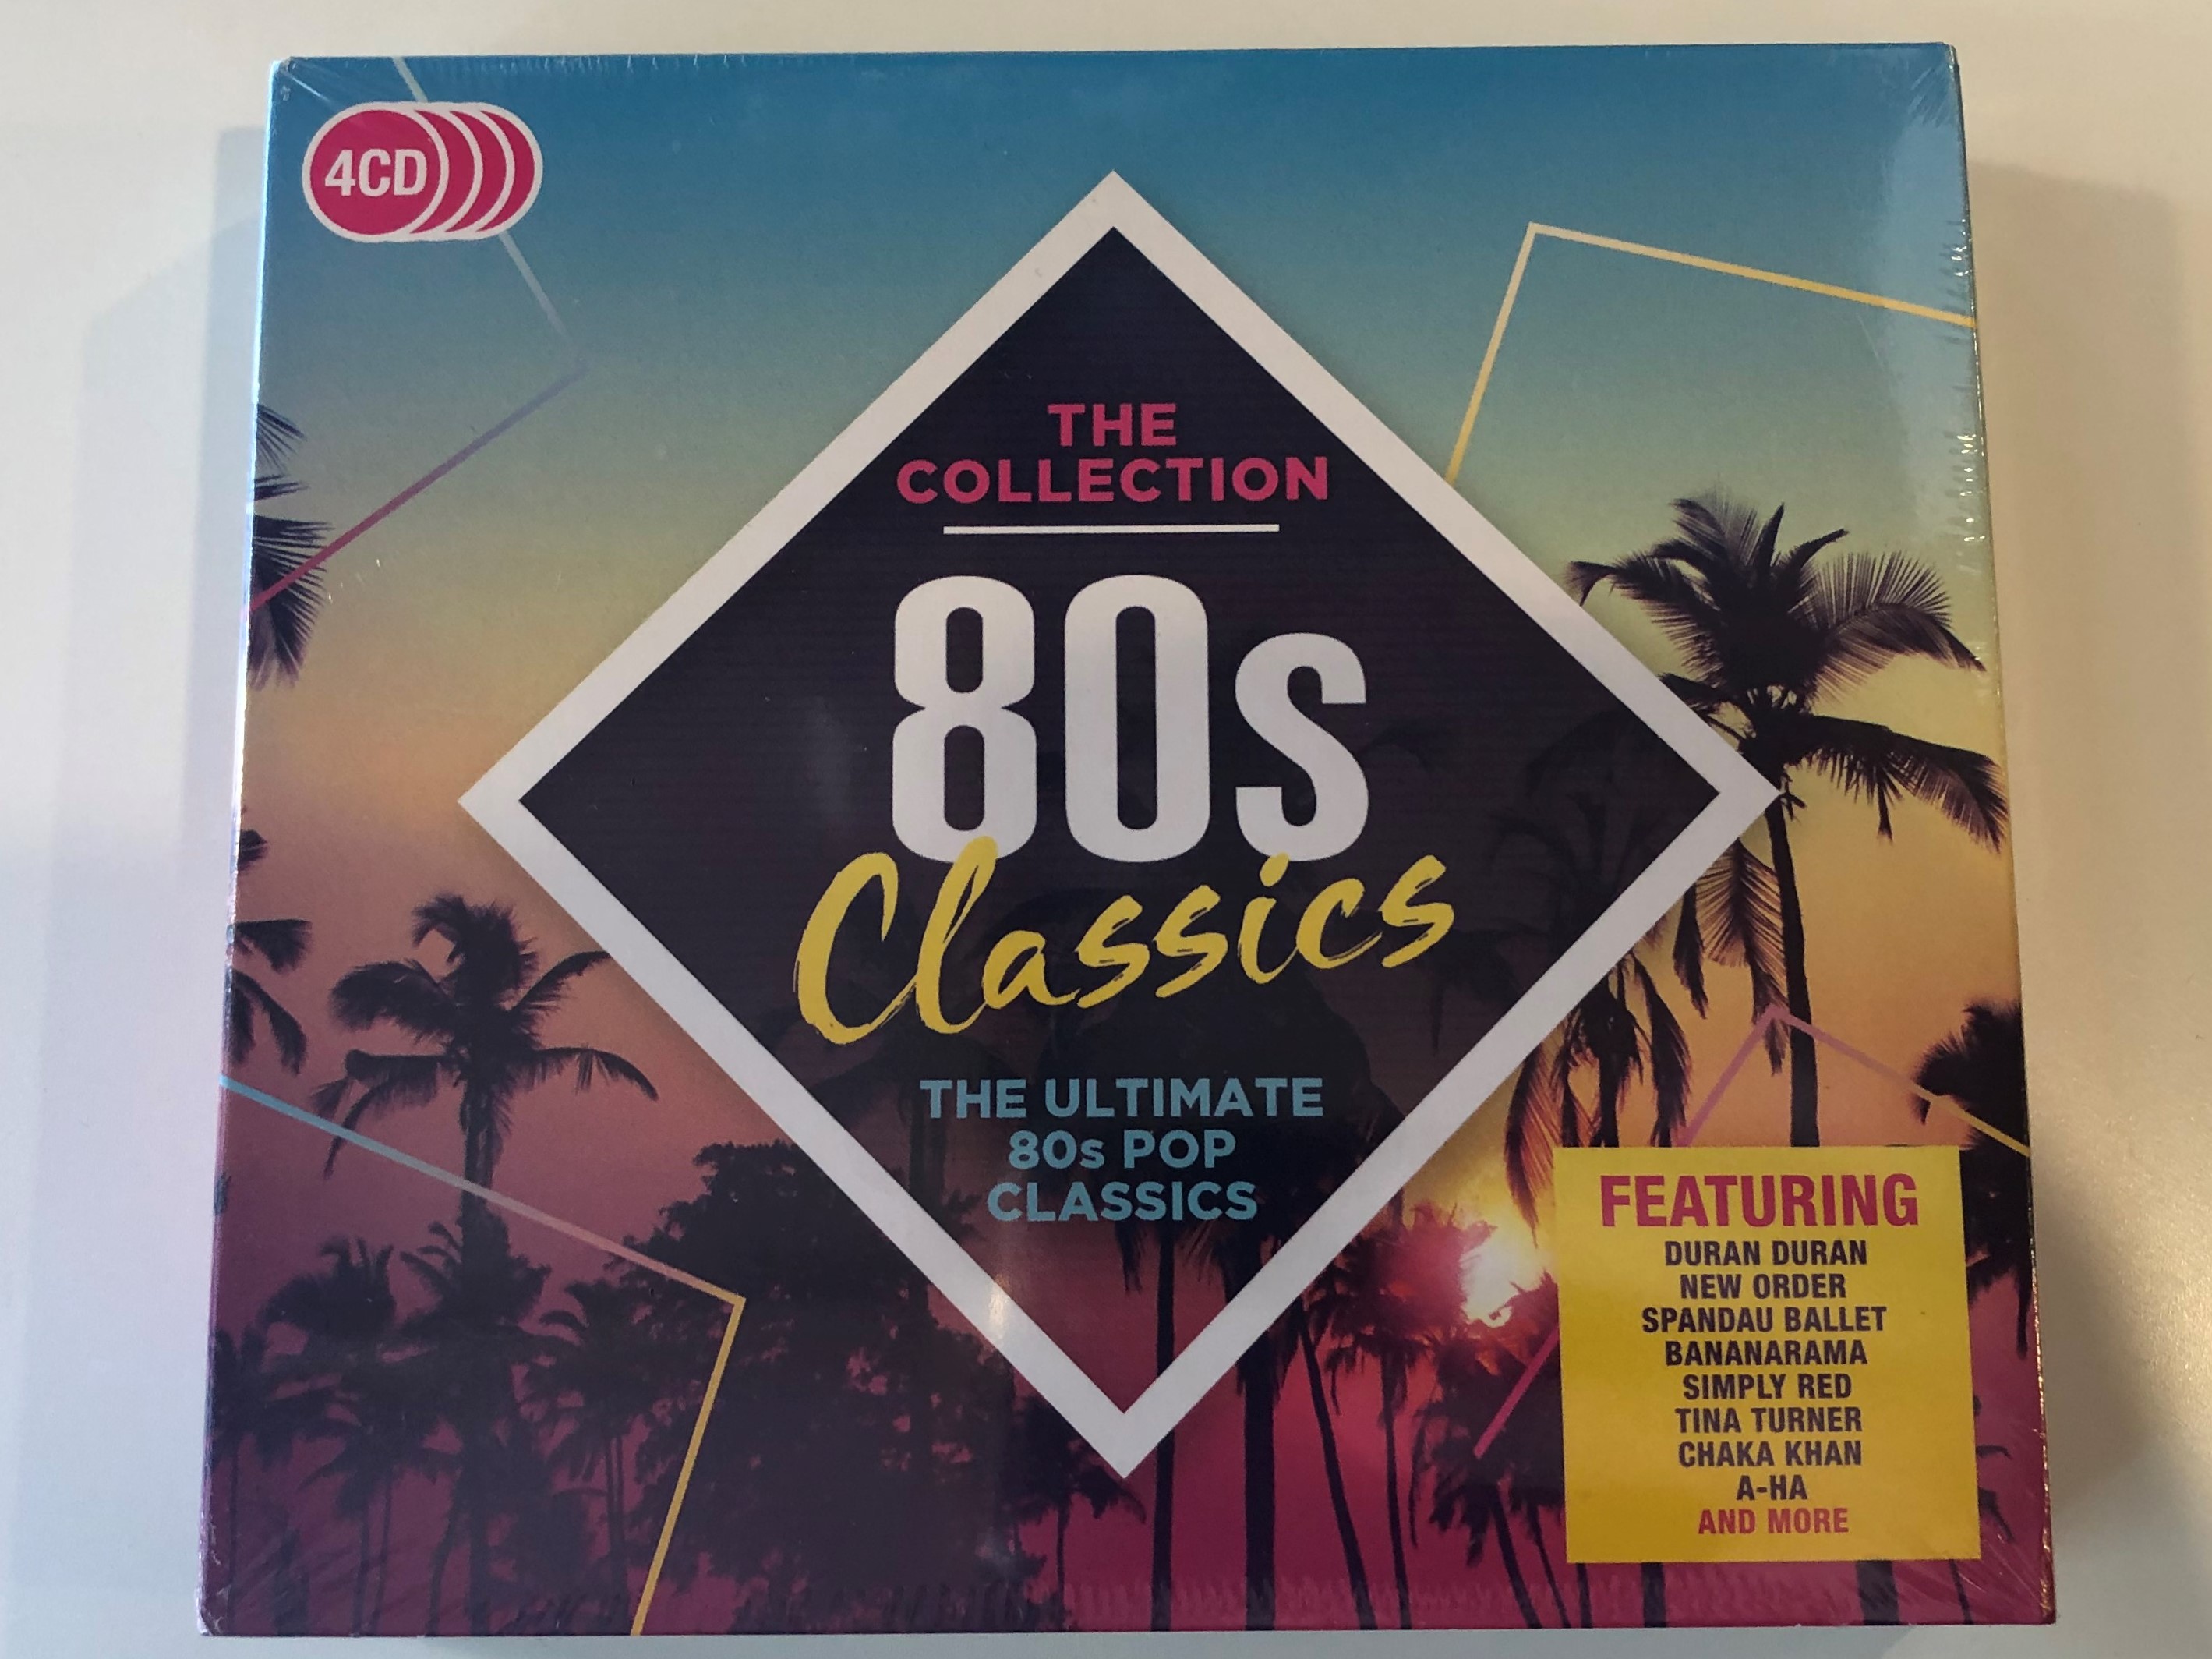 The Collection - 80s Classics - The Ultimate 80s Pop Classics / Featuring  Duran Duran, New Order, Spandau Ballet, Bananarama, Simply Red, Tina  Turner, Chaka Khan, A-HA, and more / Rhino Records